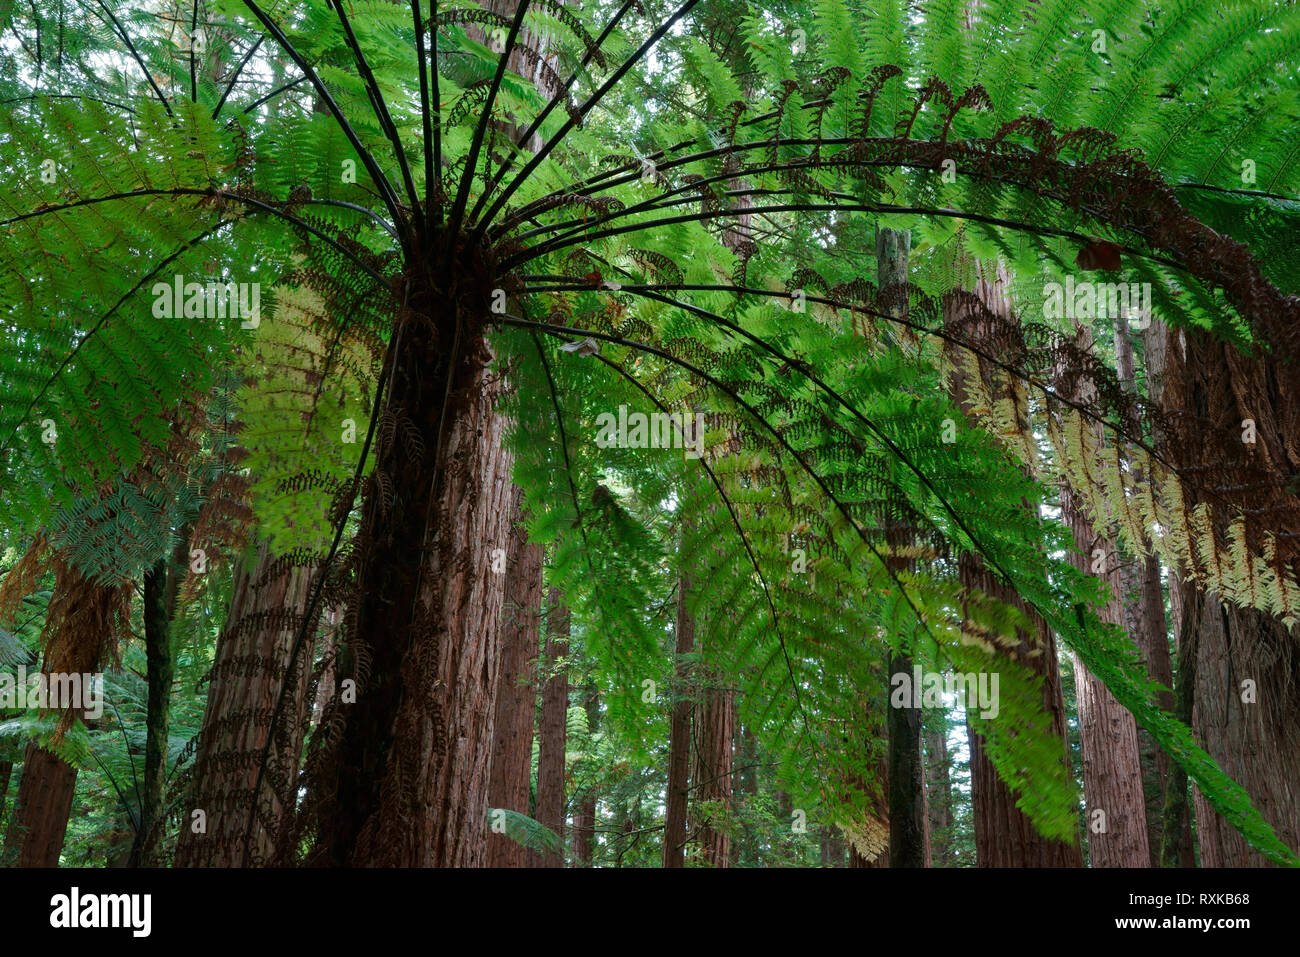 Silver Fern and Redwoods 1 Cyathea dealbata; Sequoia sempervirens Test site to see which foreign woods grew best. The Redwoods and Whakarewarewa Forest Rotarua, North Island, New Zealand Stock Photo